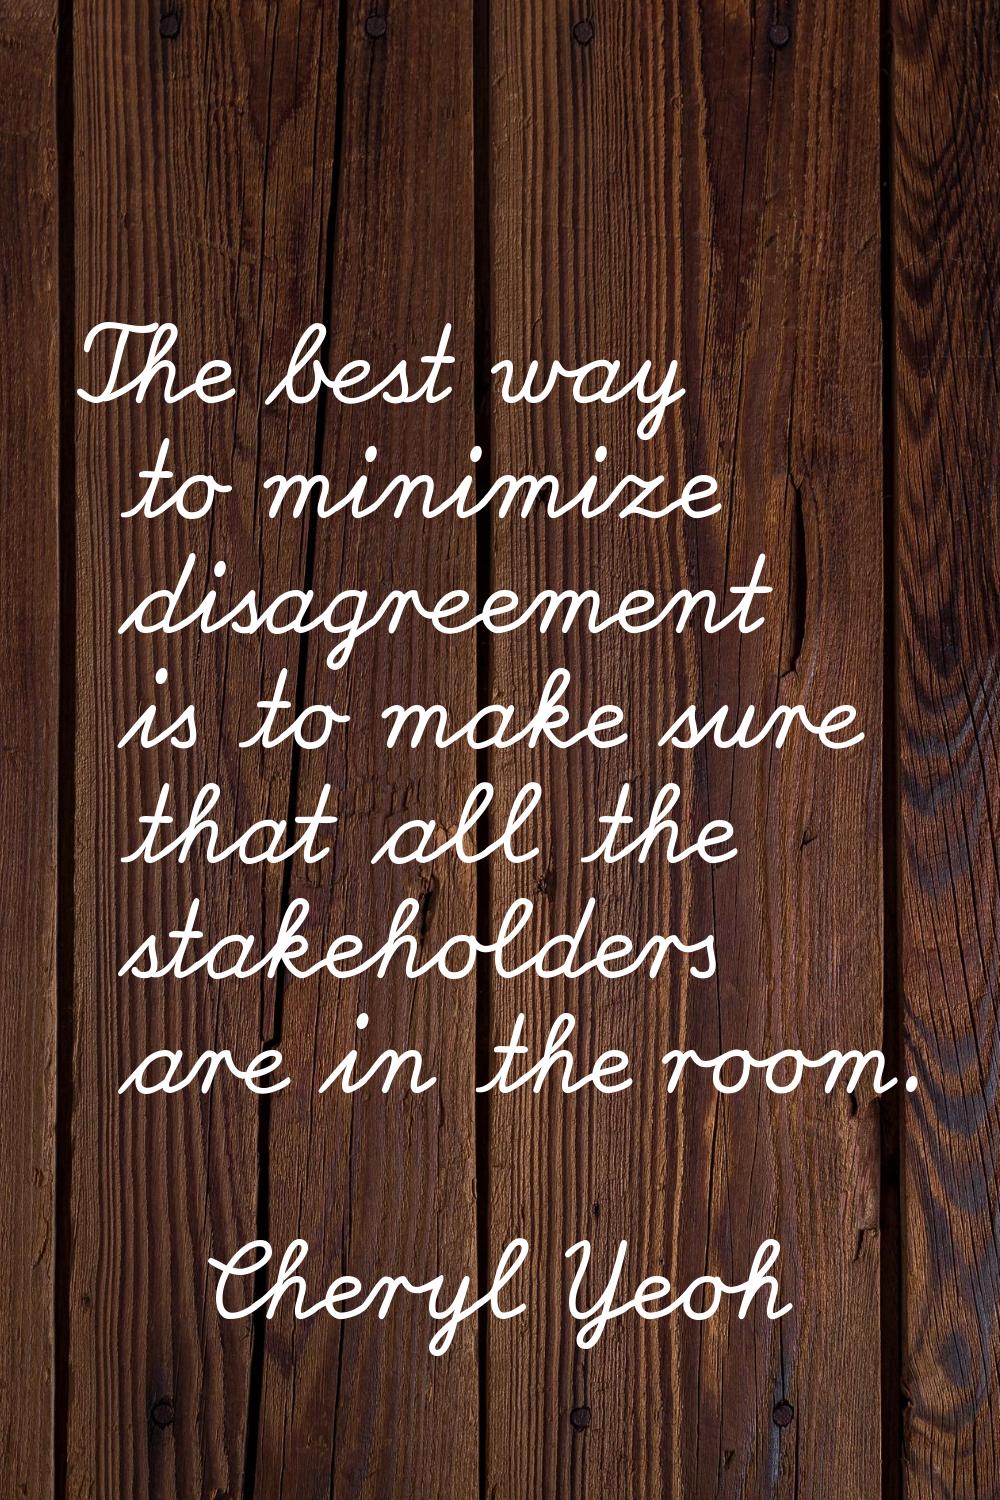 The best way to minimize disagreement is to make sure that all the stakeholders are in the room.